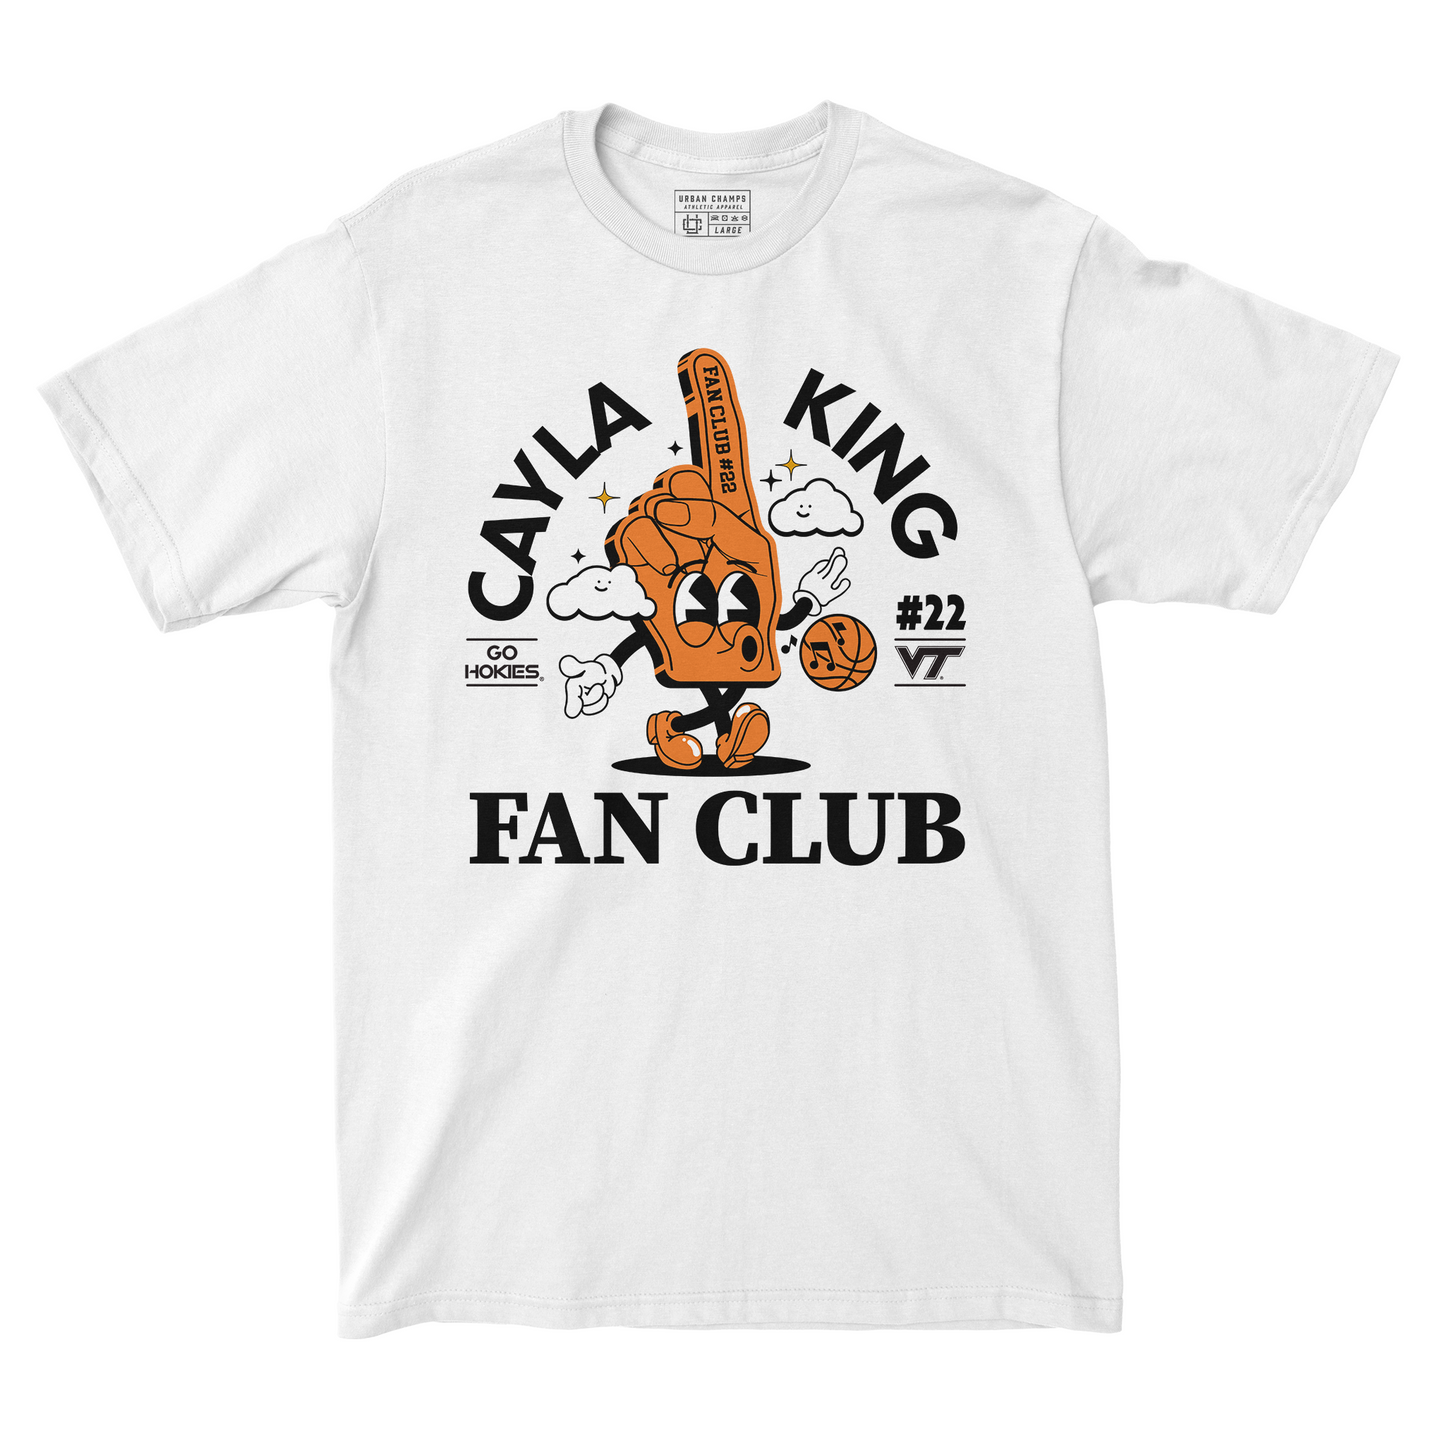 EXCLUSIVE: Women's Basketball - Fan Club Collection